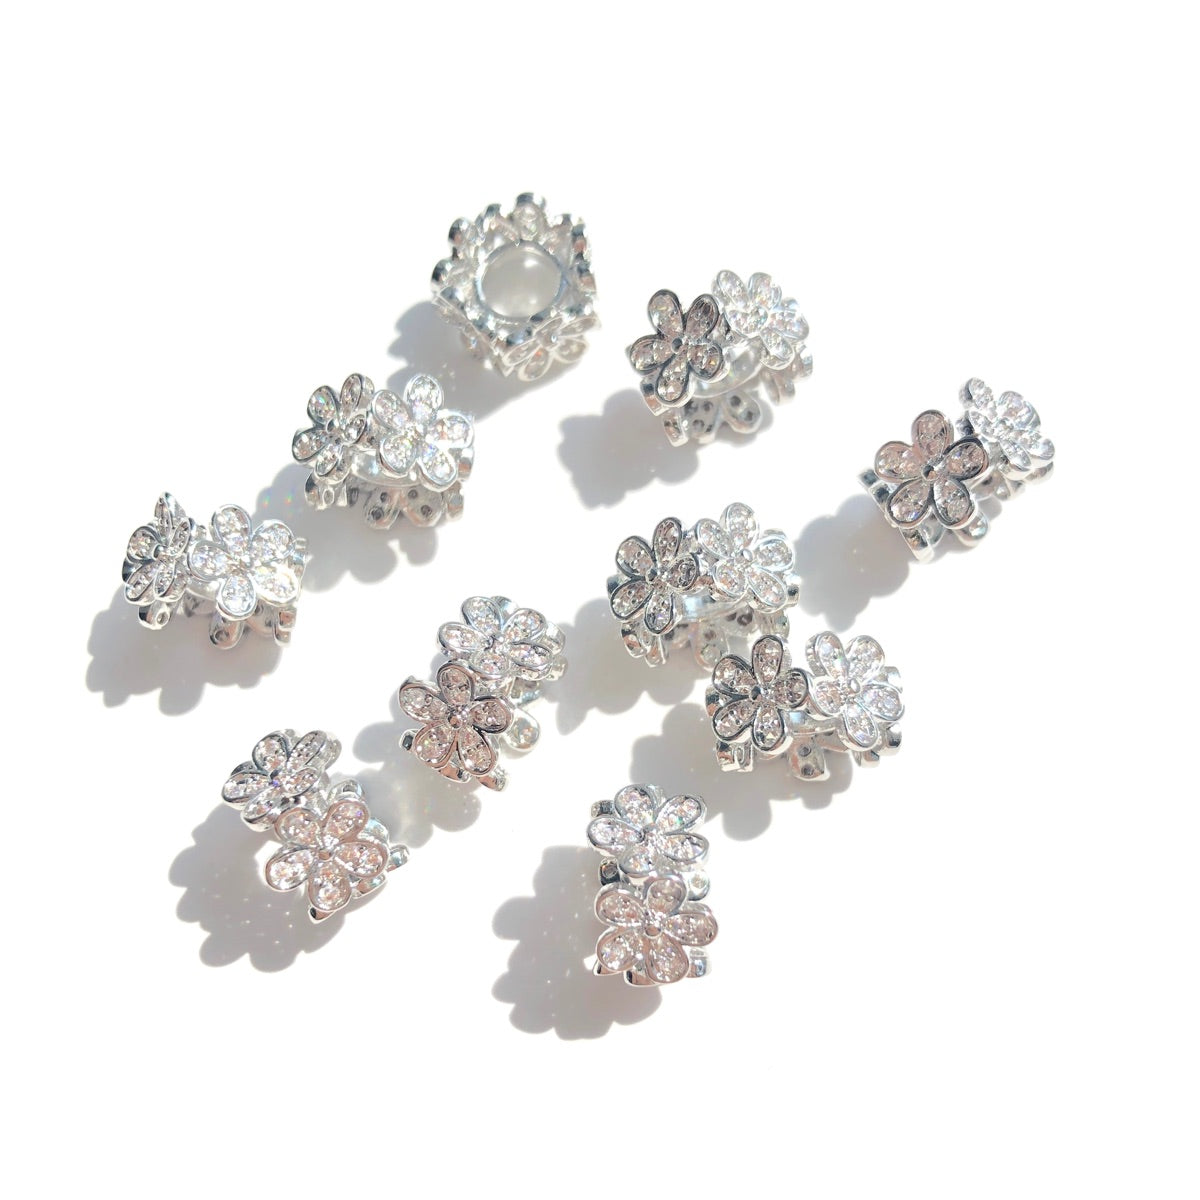 10-20-50pcs/lot 10.6*6.8mm CZ Paved Flower Spacers Clear on Silver CZ Paved Spacers New Spacers Arrivals Wholesale Charms Beads Beyond